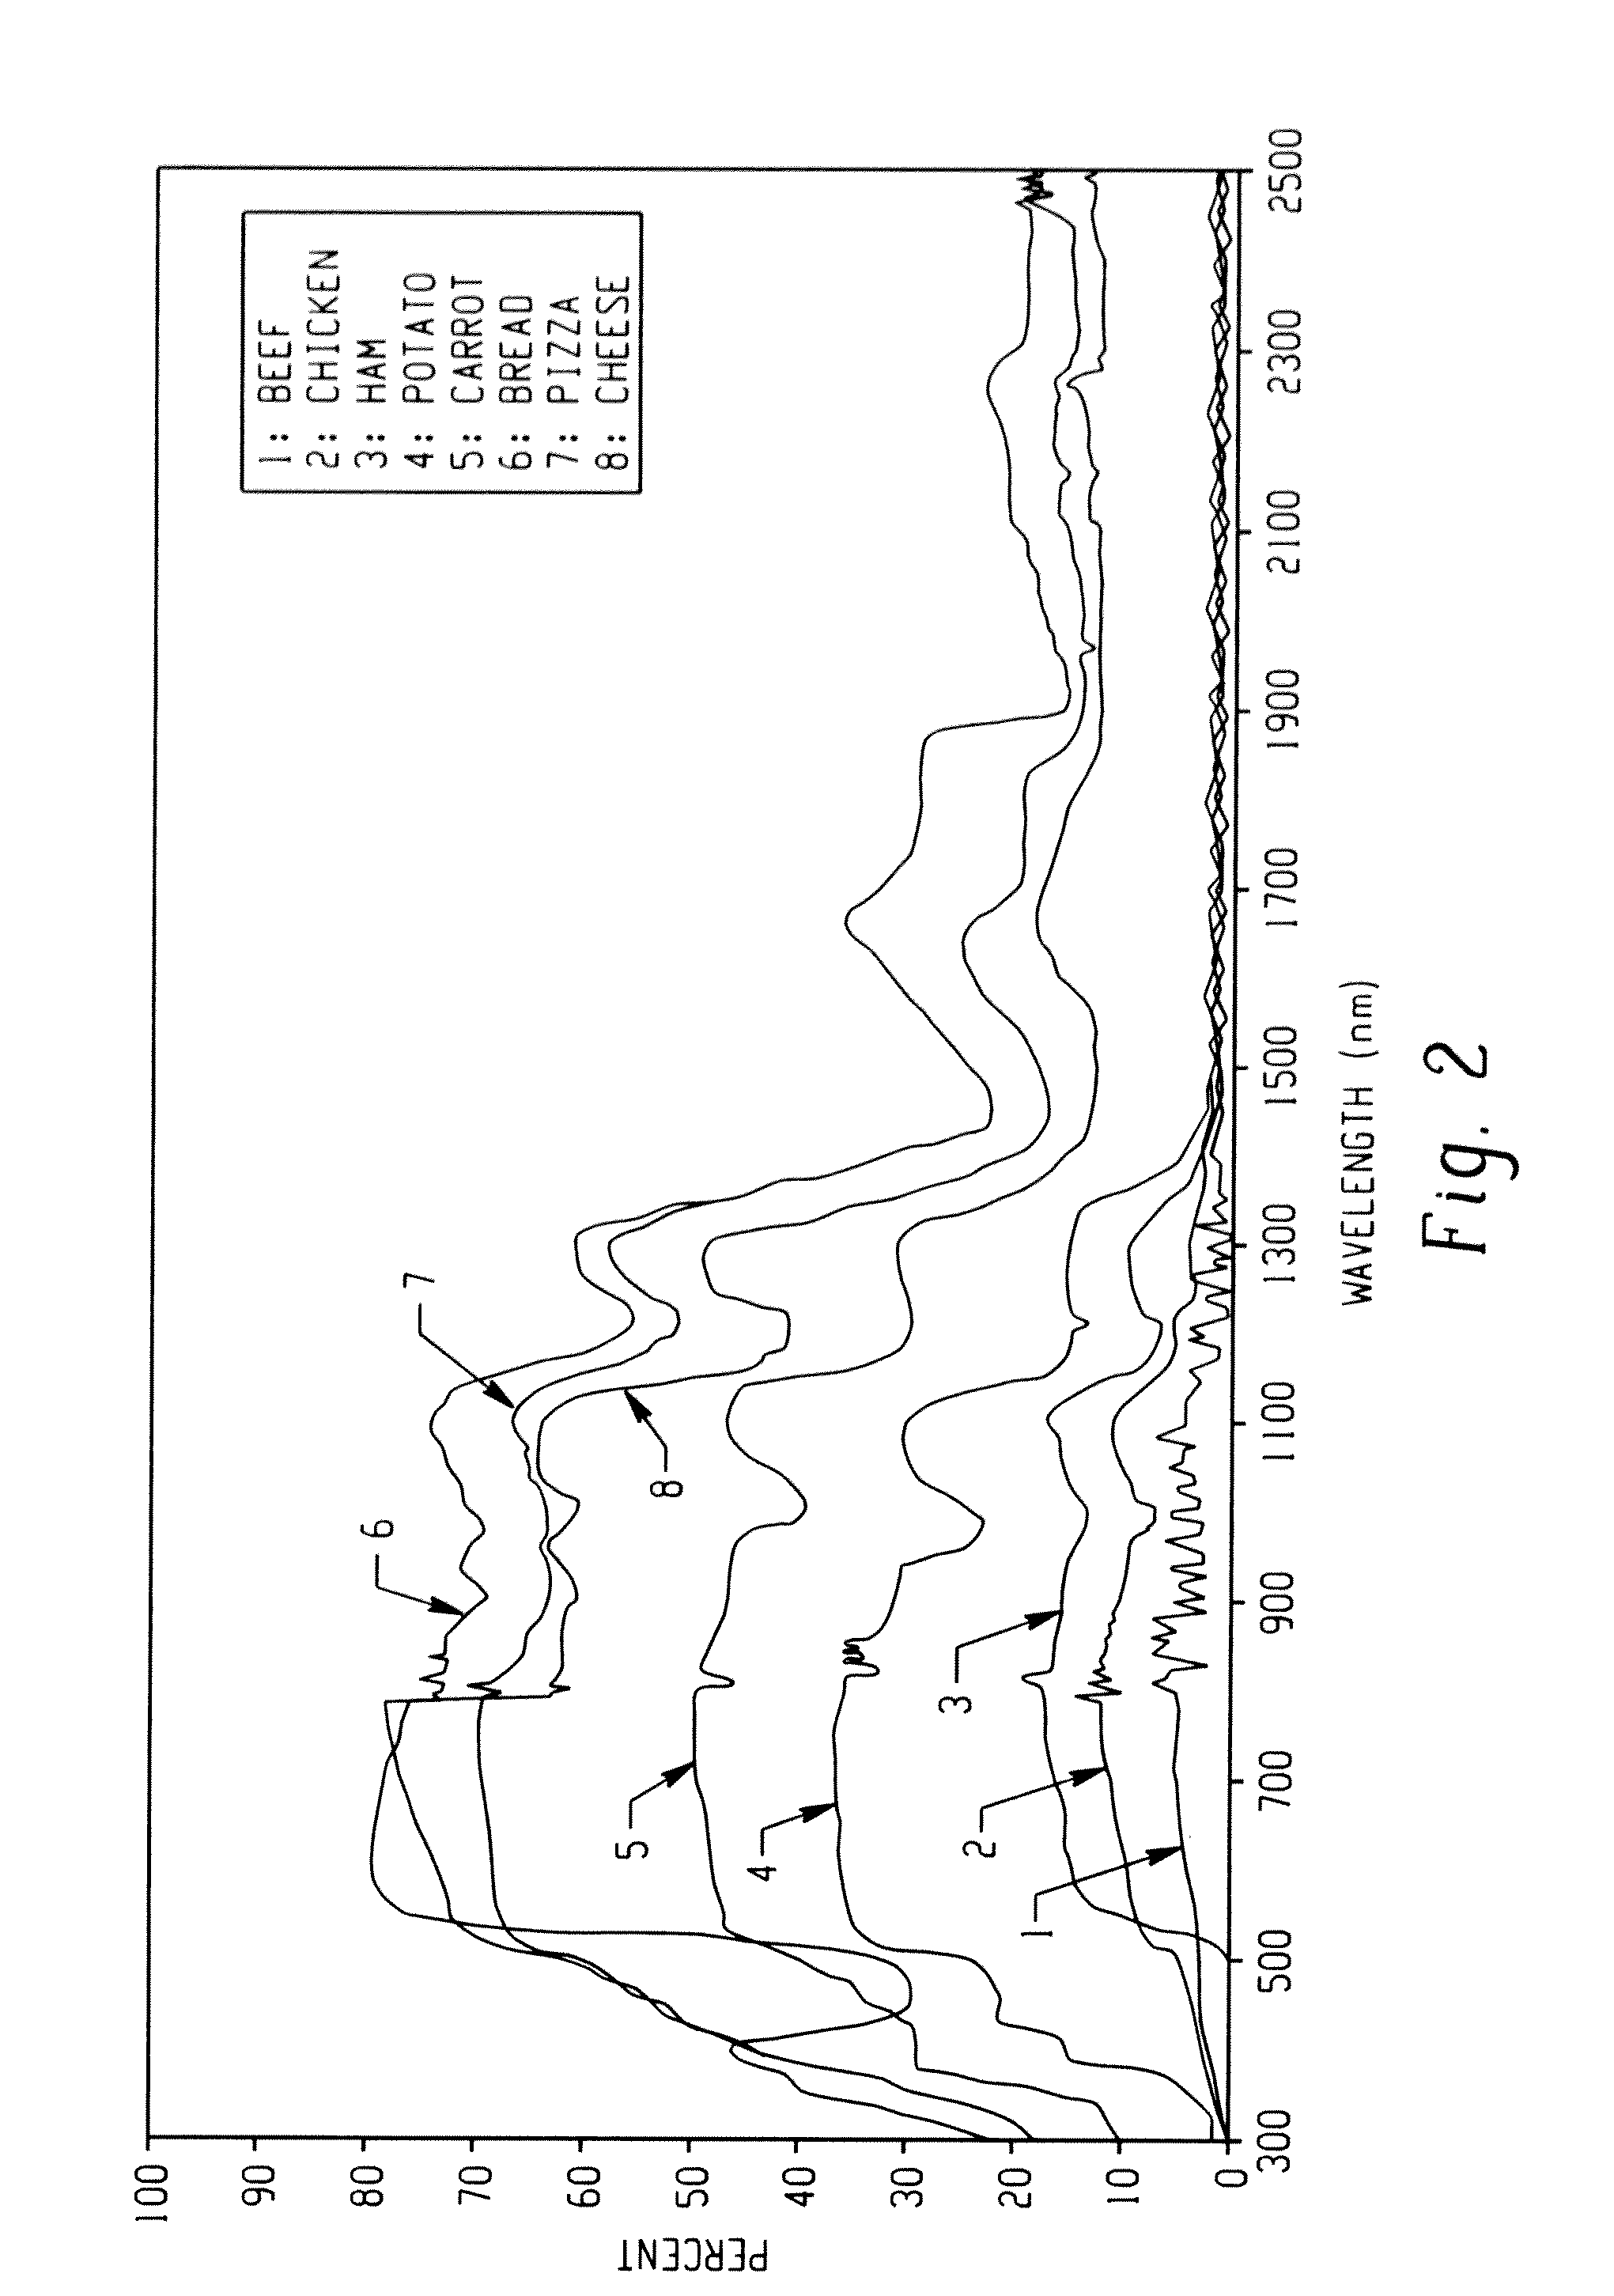 Method and system for digital narrowband, wavelength specific cooking, curing, food preparation, and processing